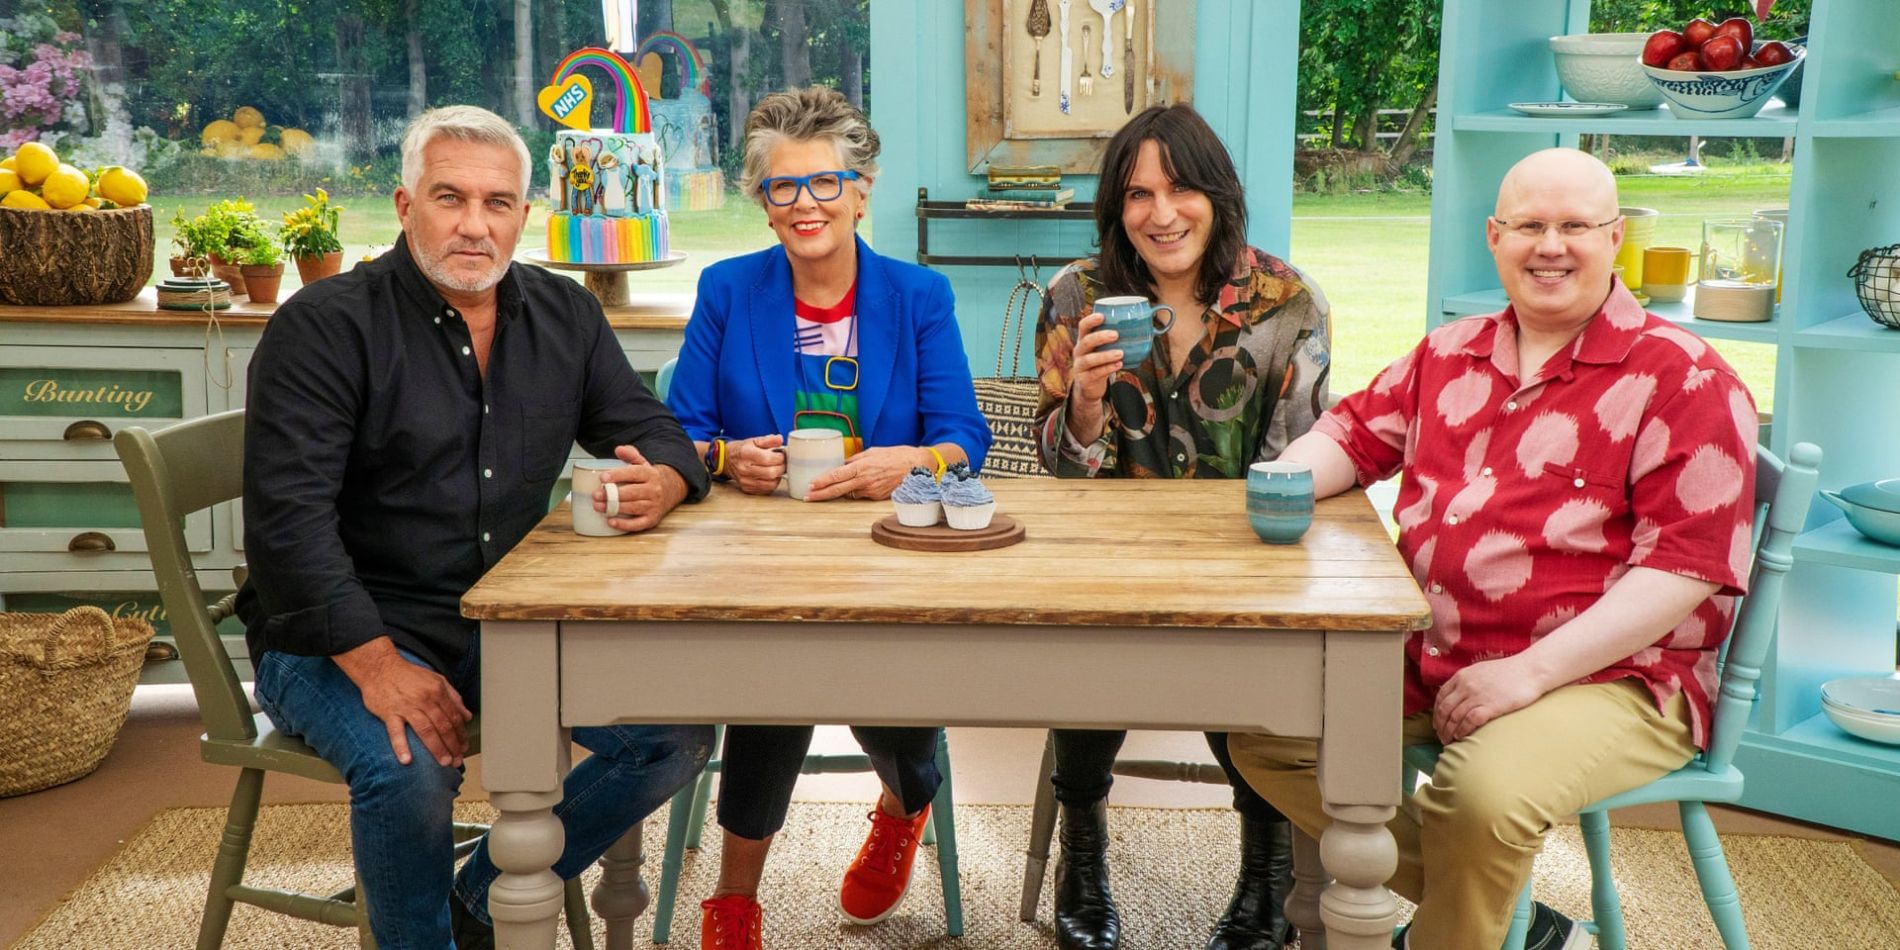 The hosts of The Great British Baking Show sitting at a table